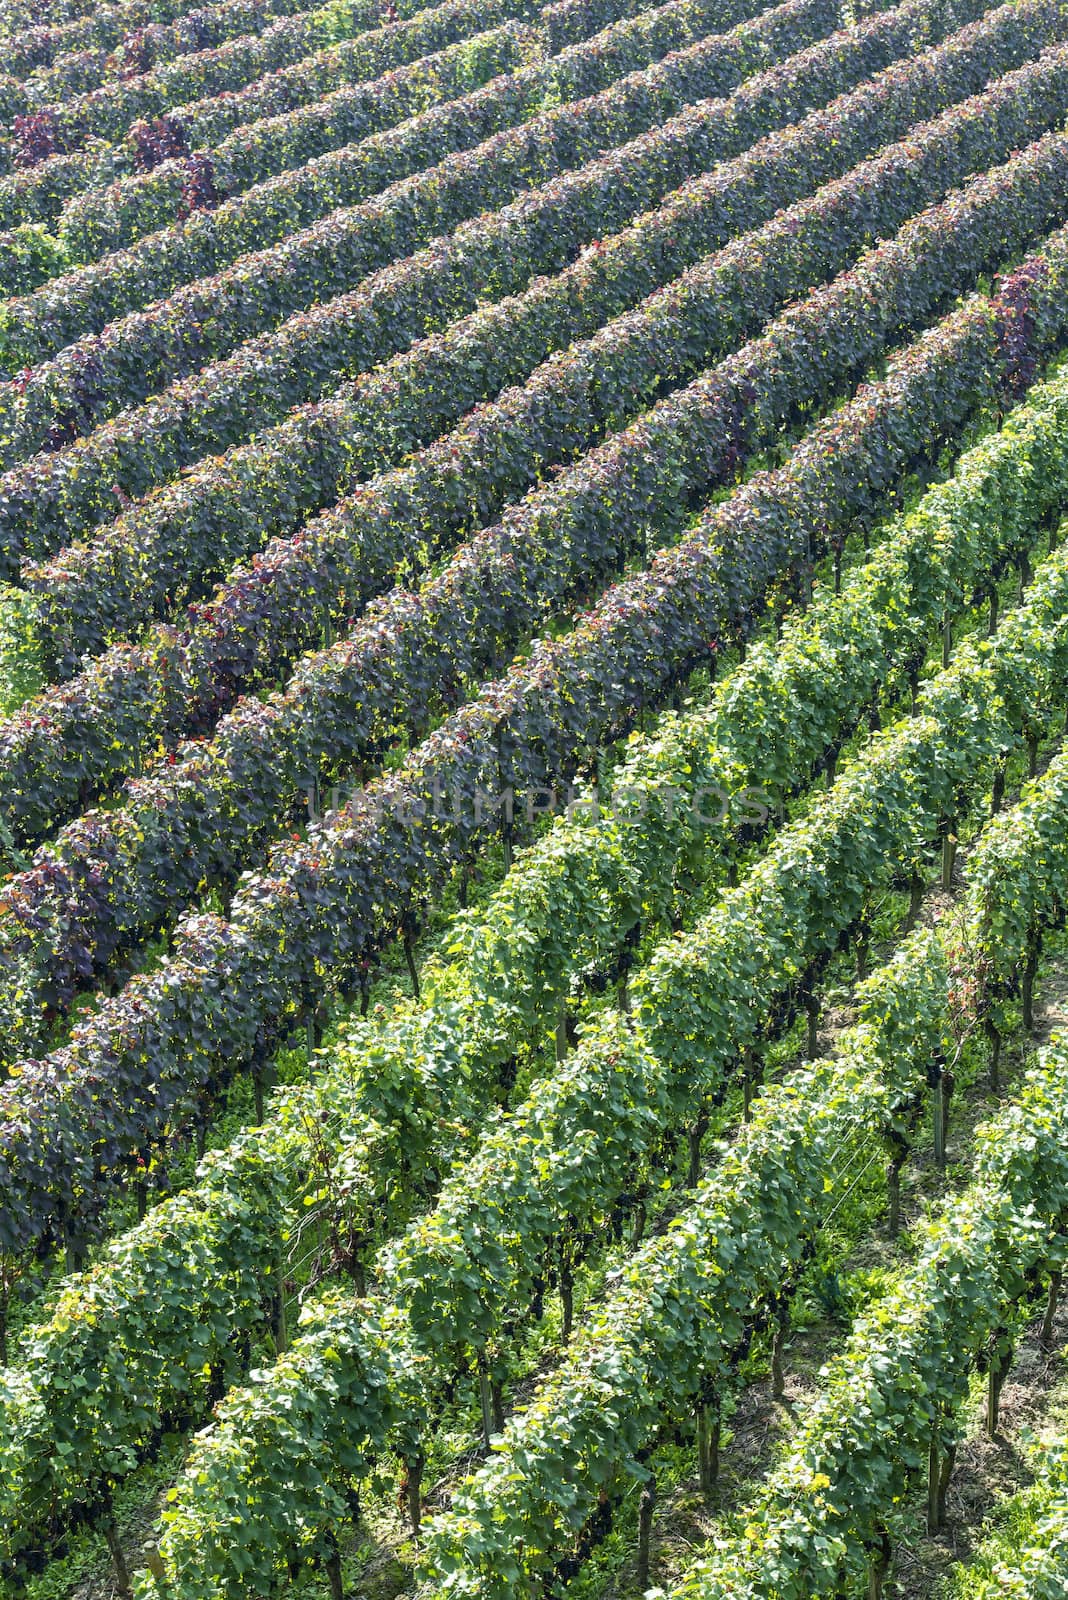 Beautiful rows of grapes in the vineyard before the harvest time